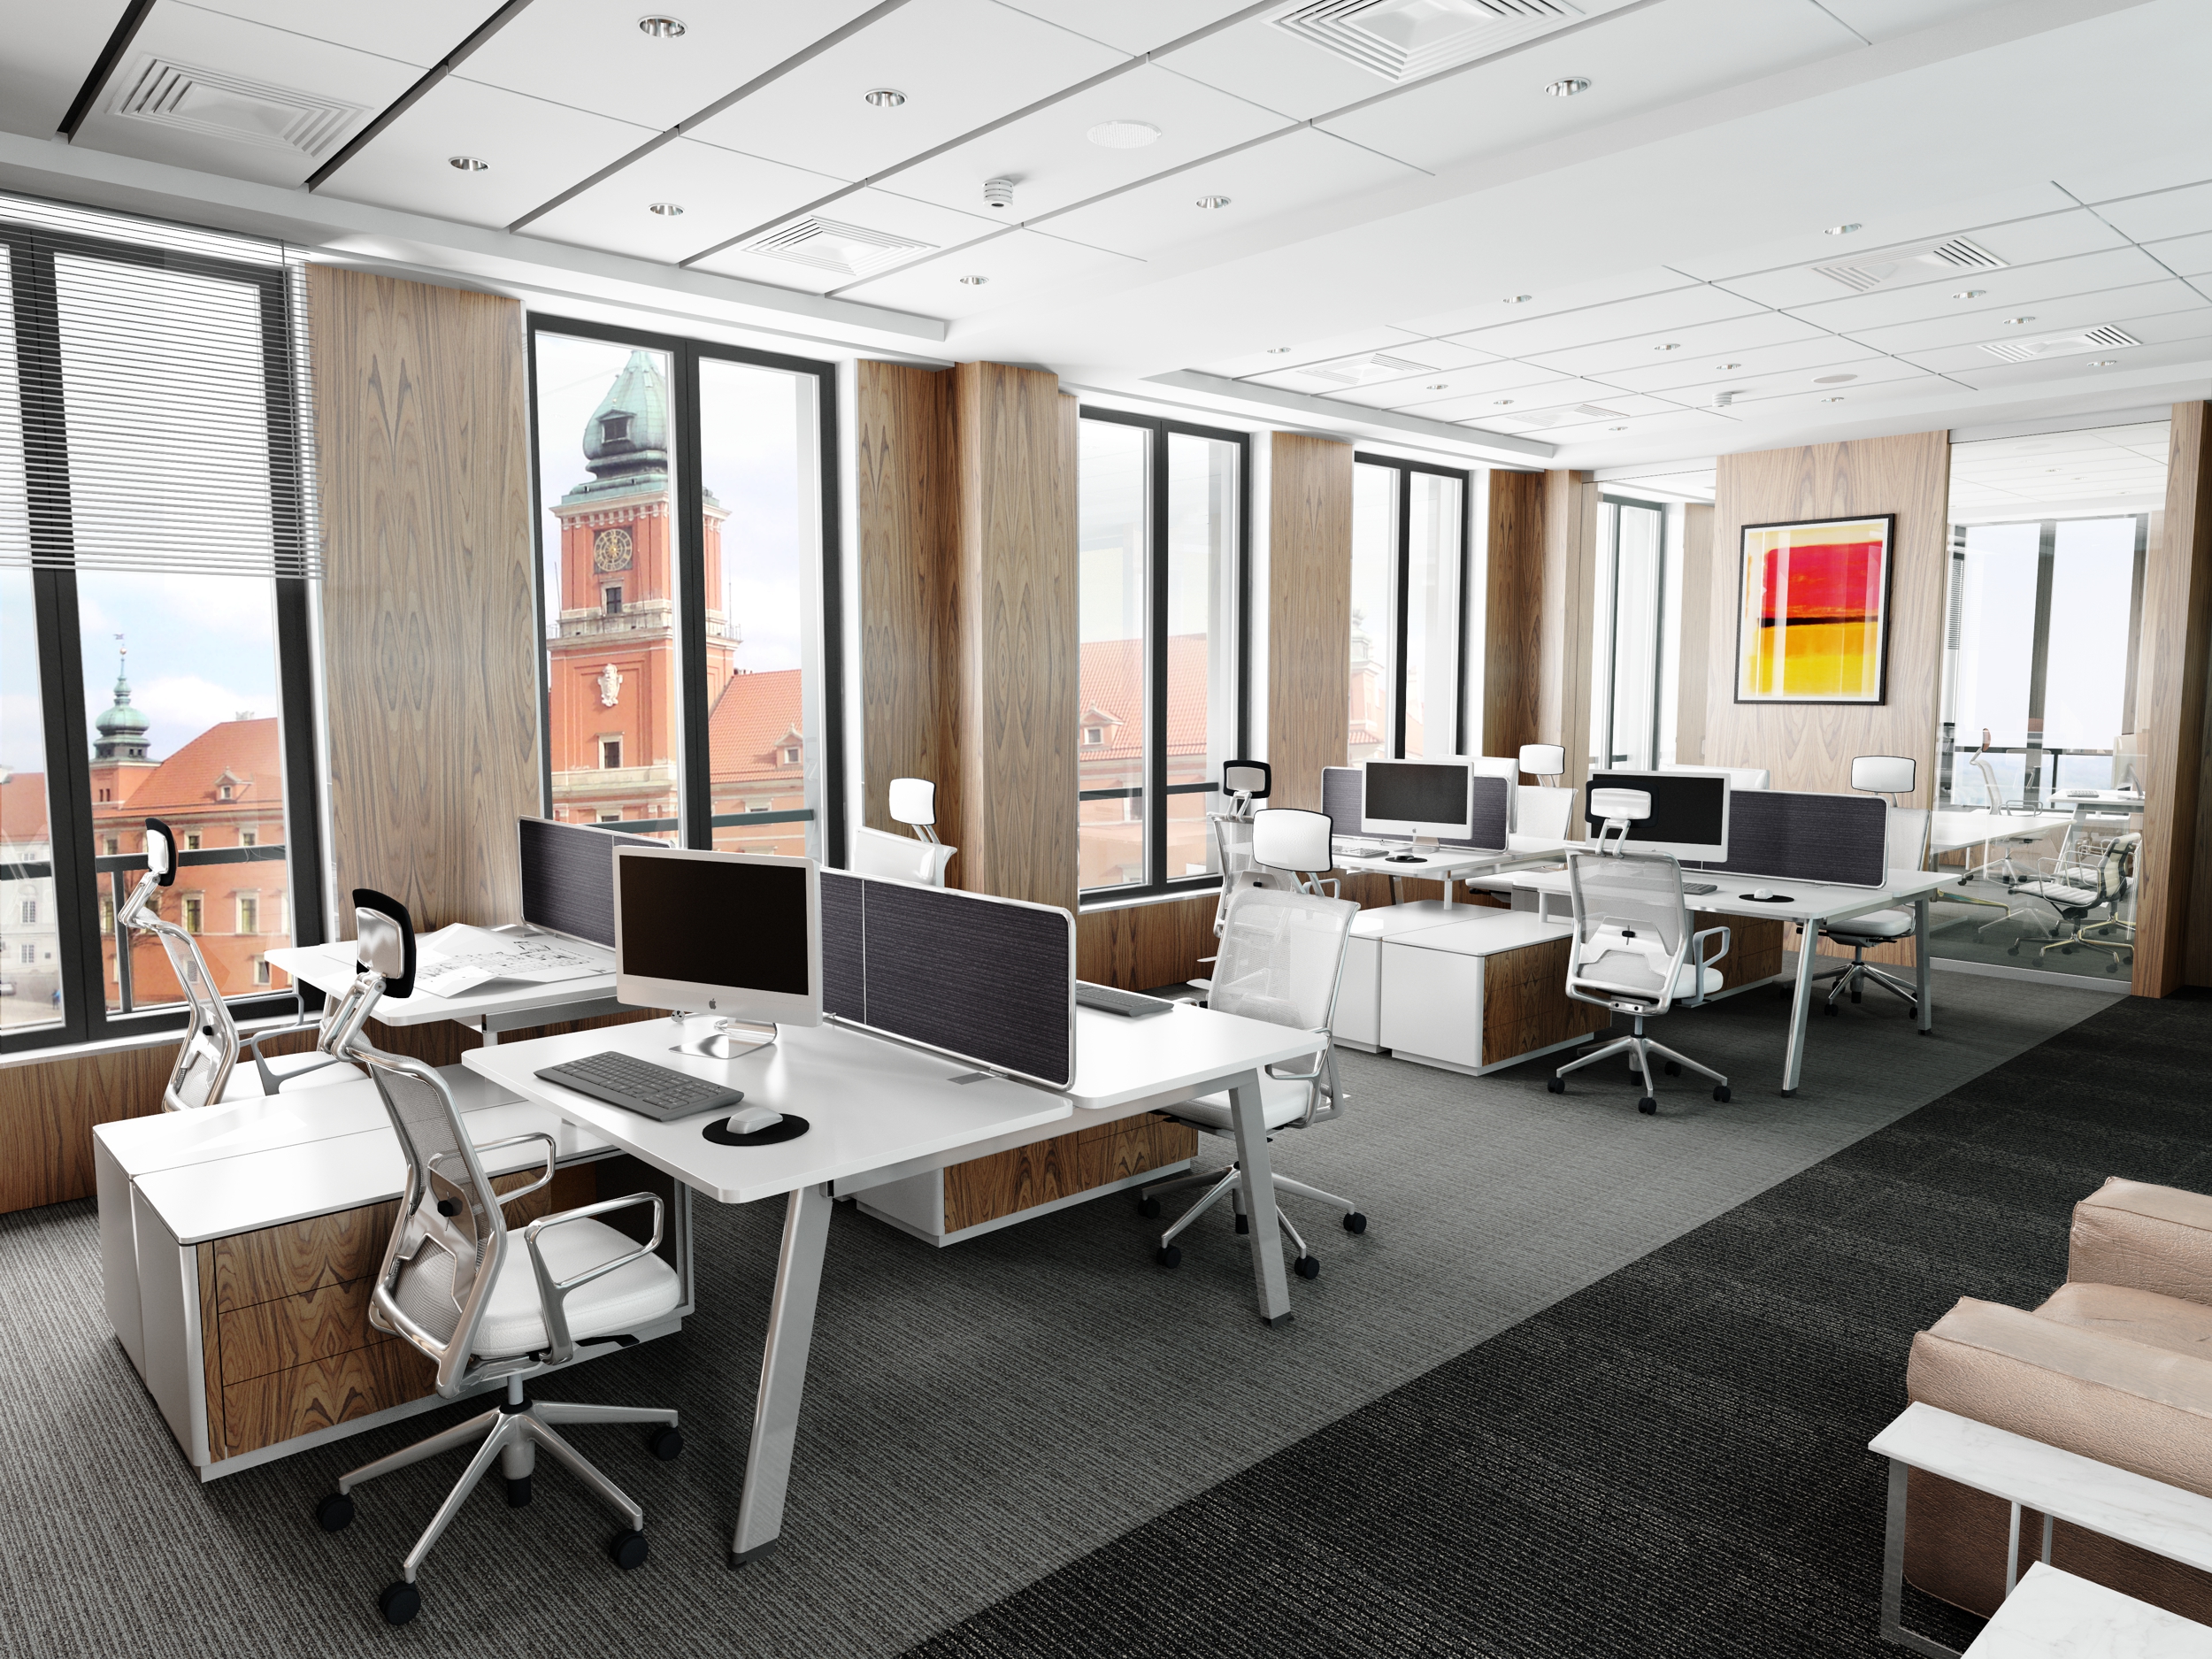 Open Space Office Wallpapers High Quality Download Free